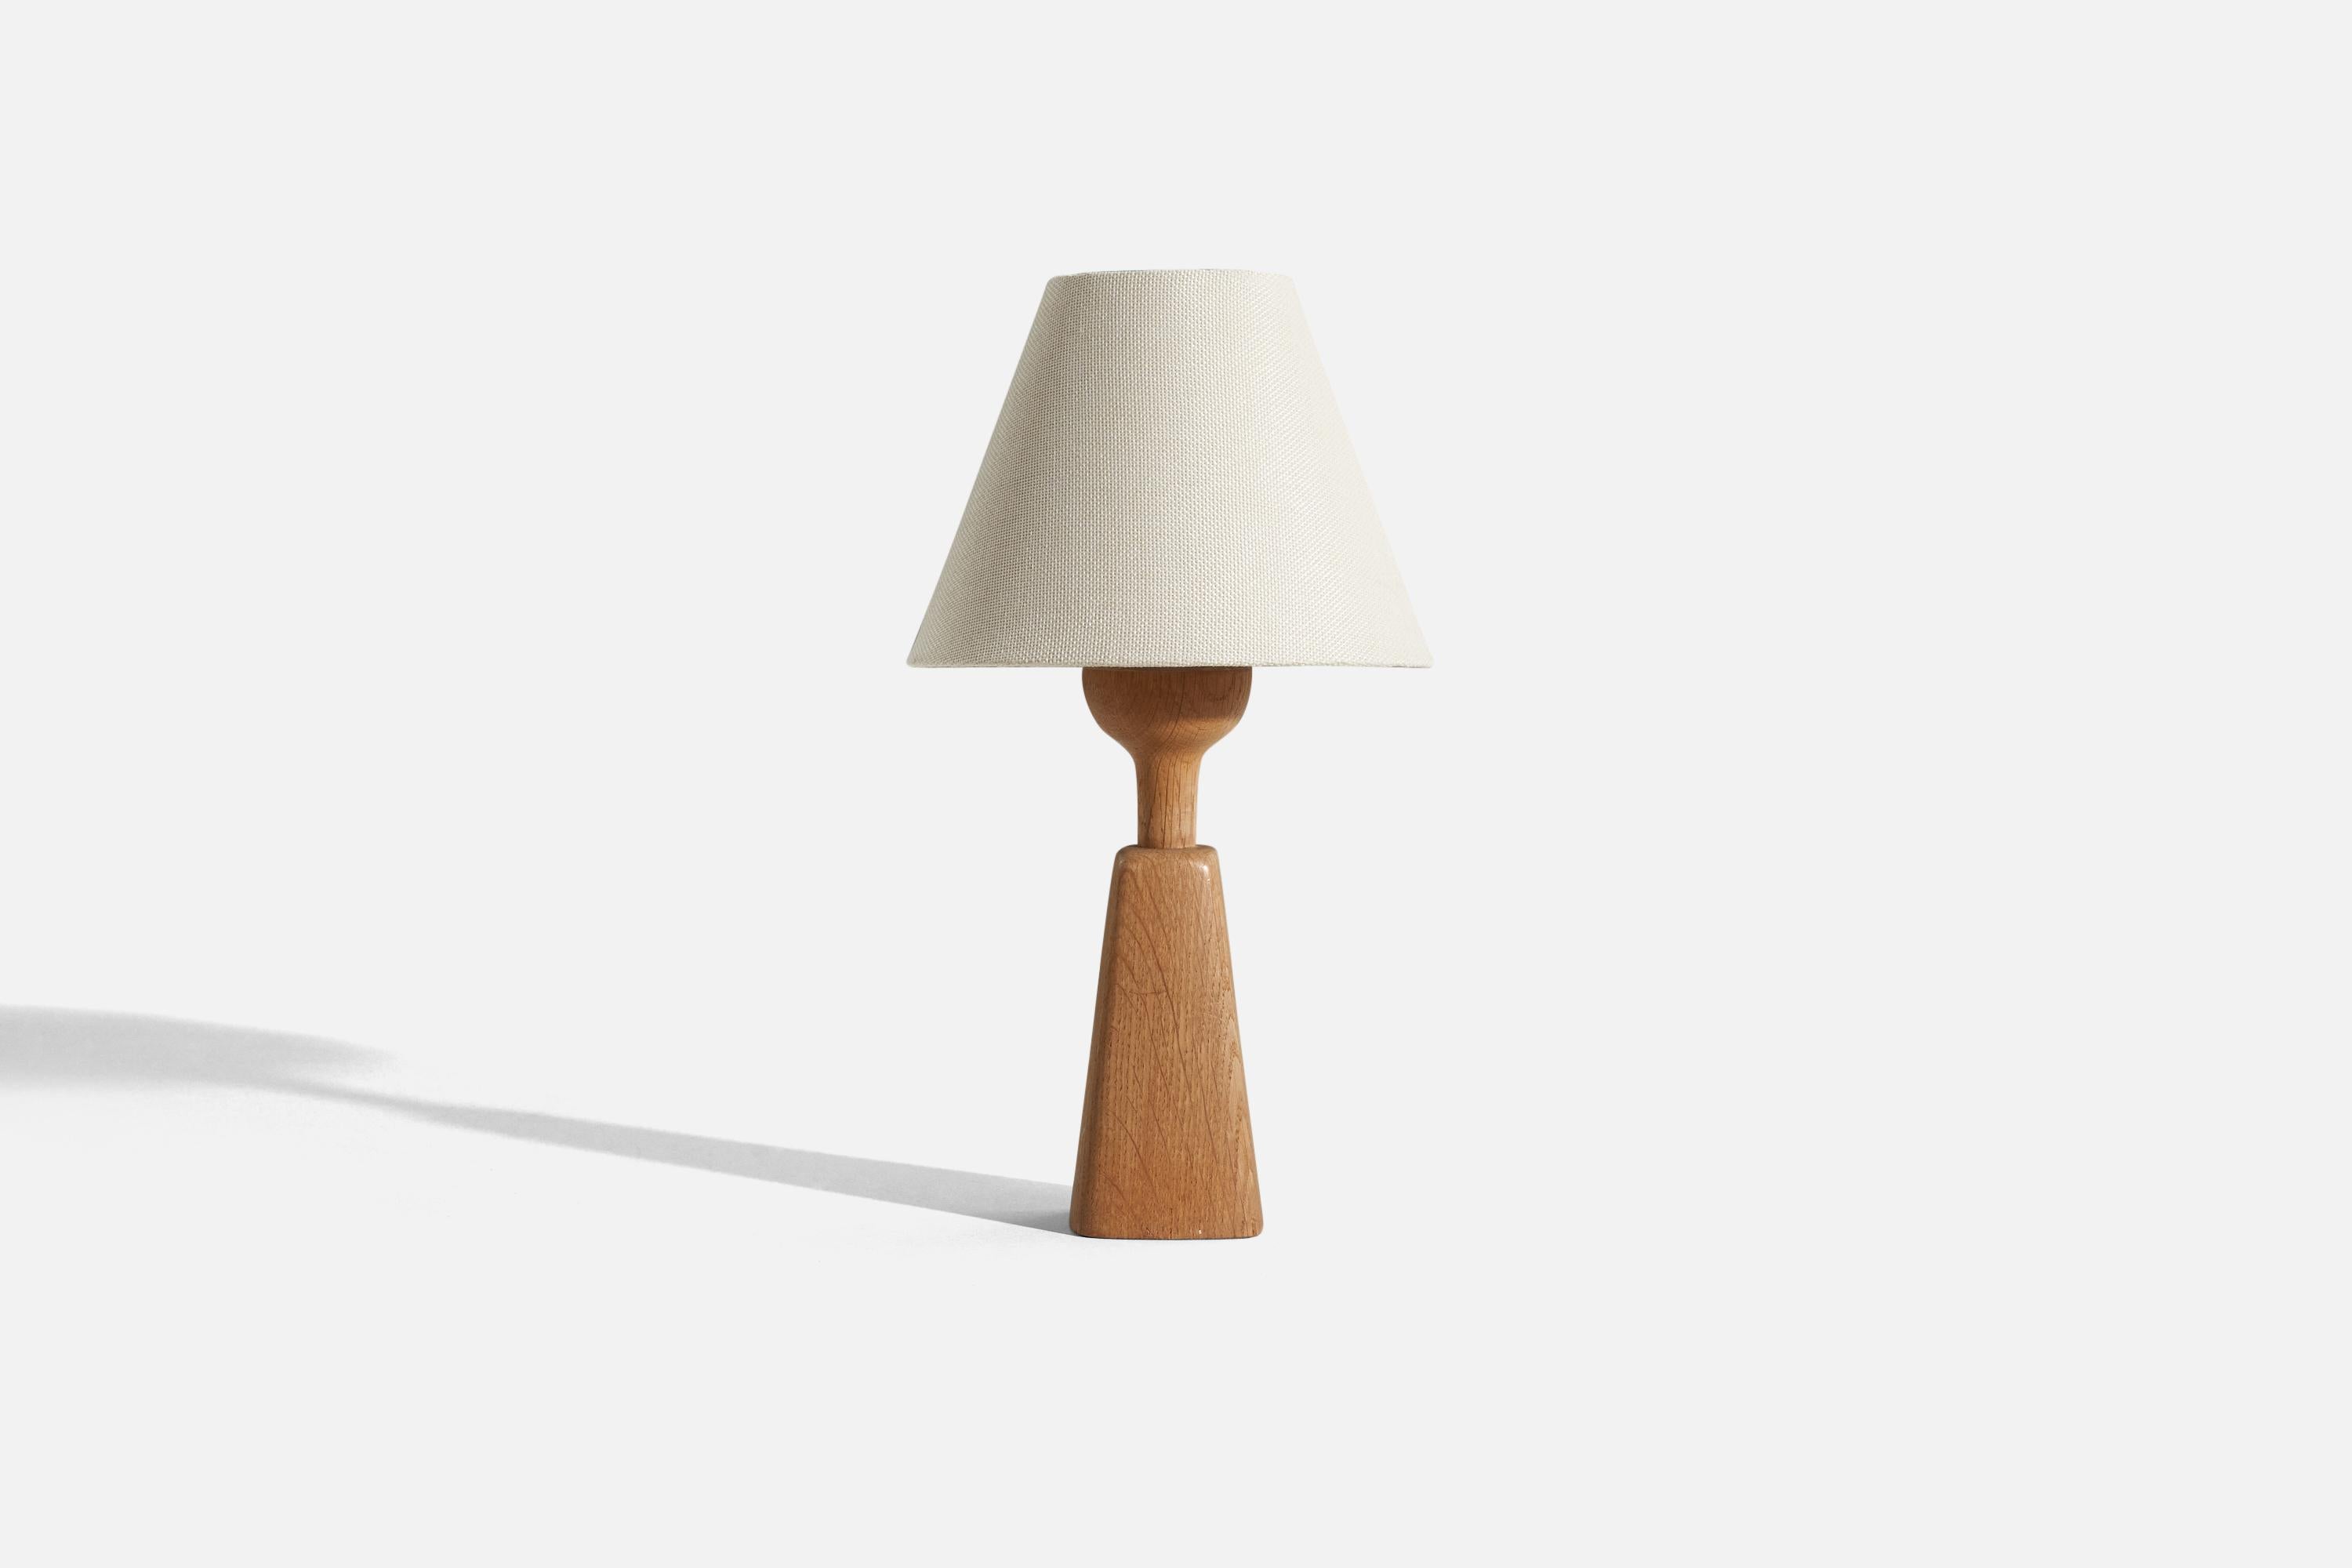 An oak table lamp designed and produced in Sweden, c. 1970s.

Sold without lampshade. 
Dimensions of Lamp (inches) : 10.625 x 3 x 3 (H x W x D)
Dimensions of Shade (inches) : 3.75 x 8 x 6.25 (T x B x H)
Dimension of Lamp with Shade (inches) : 14.25